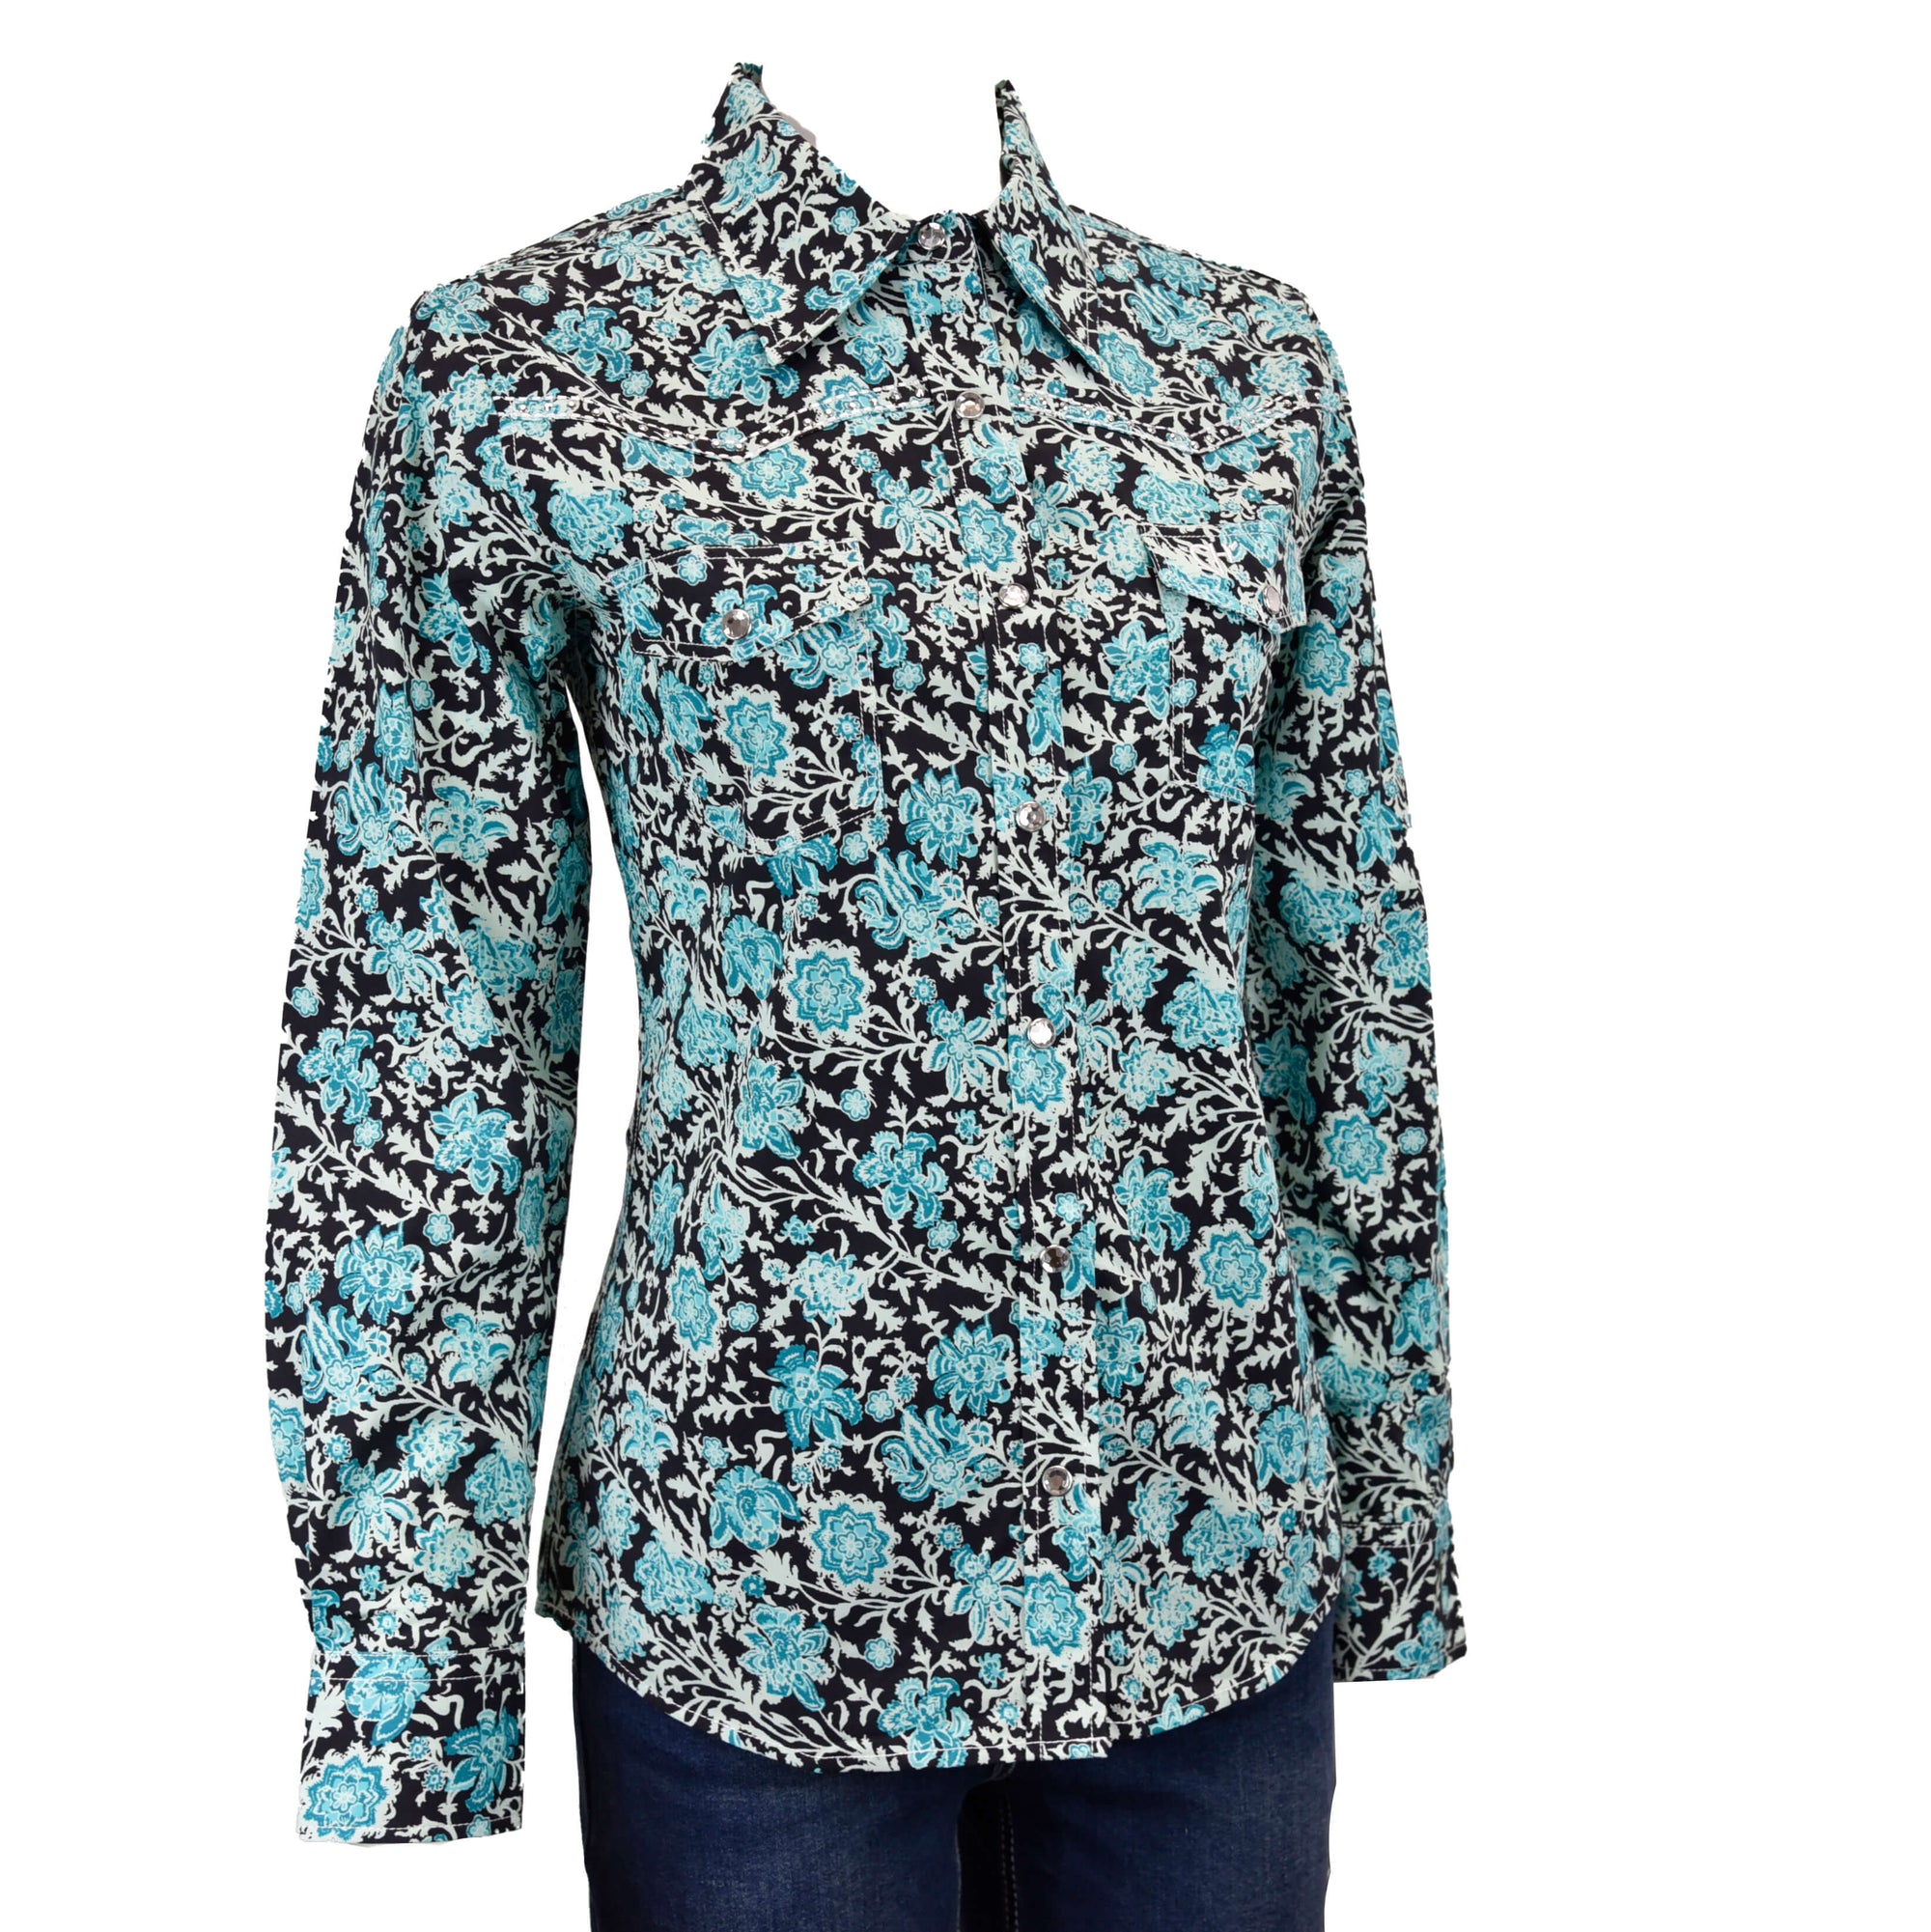 Women's Cowgirl Hardware Floral Turquiose Long Sleeve Western Shirt from Cowboy Hardware